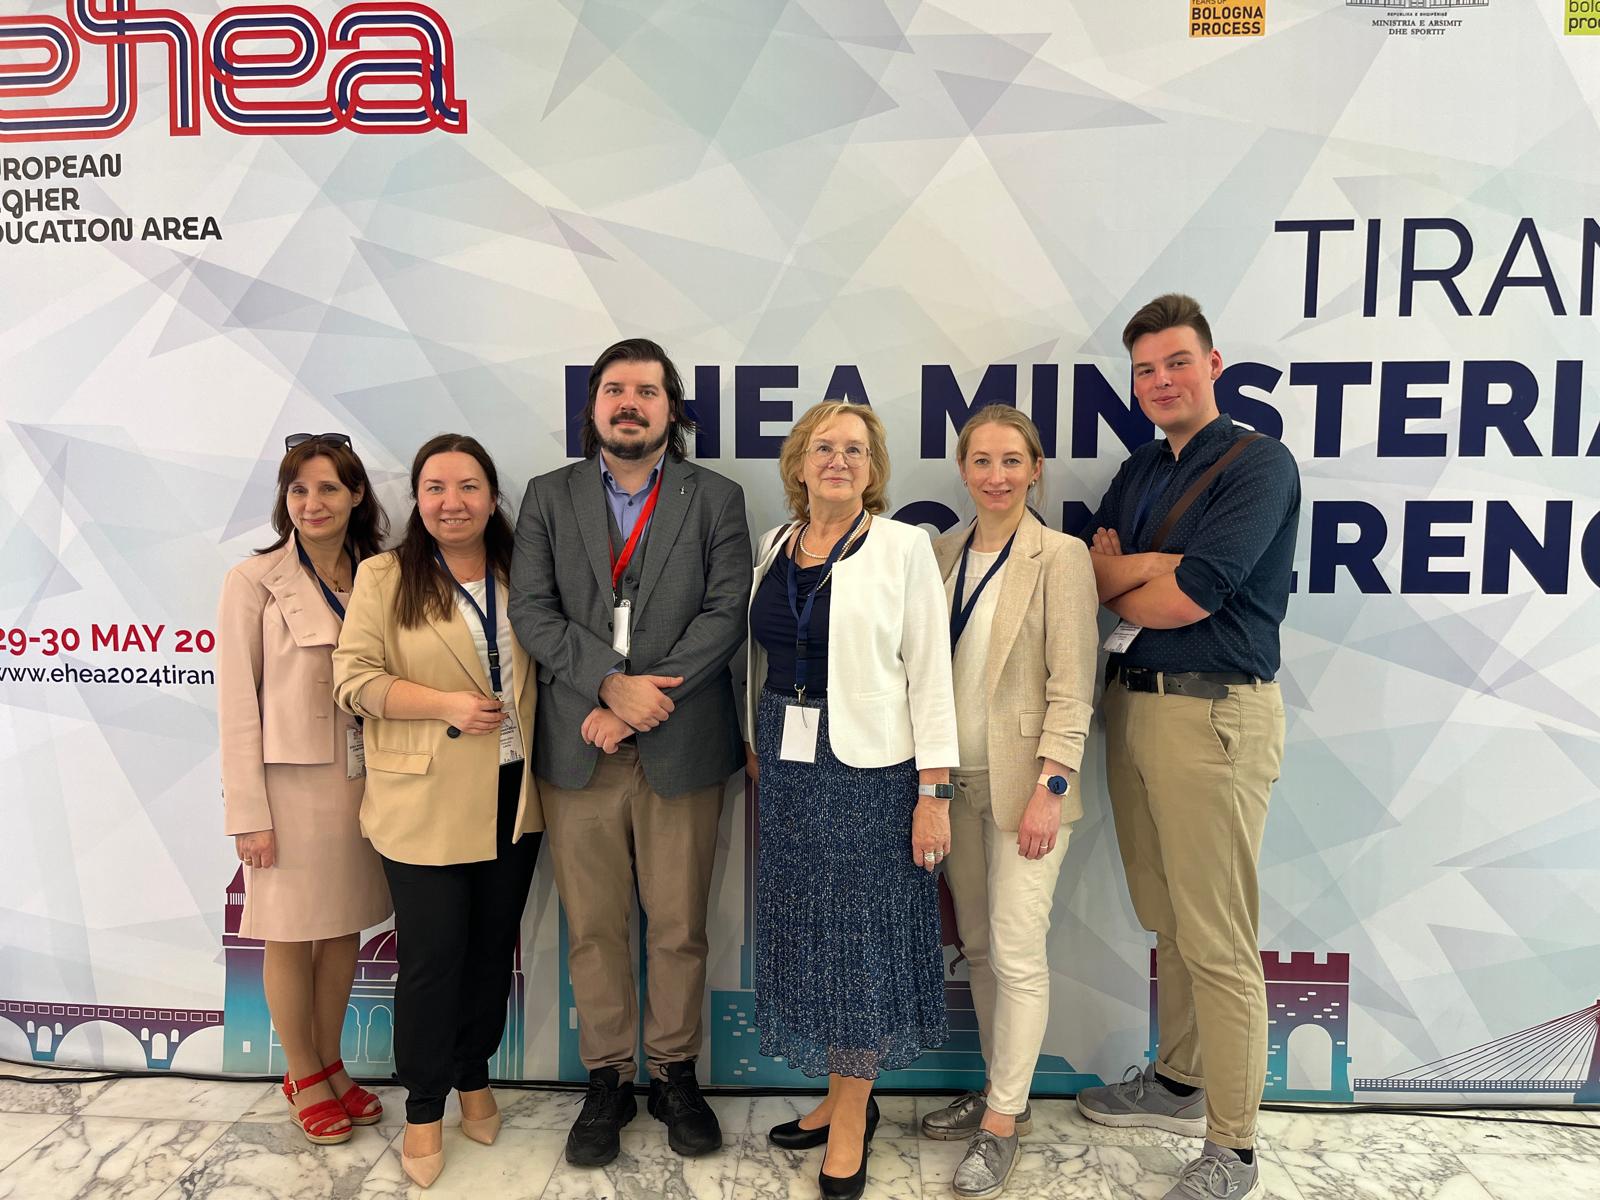 Latvian delegation participates in the European Higher Education Area Ministerial Conference in Tirana